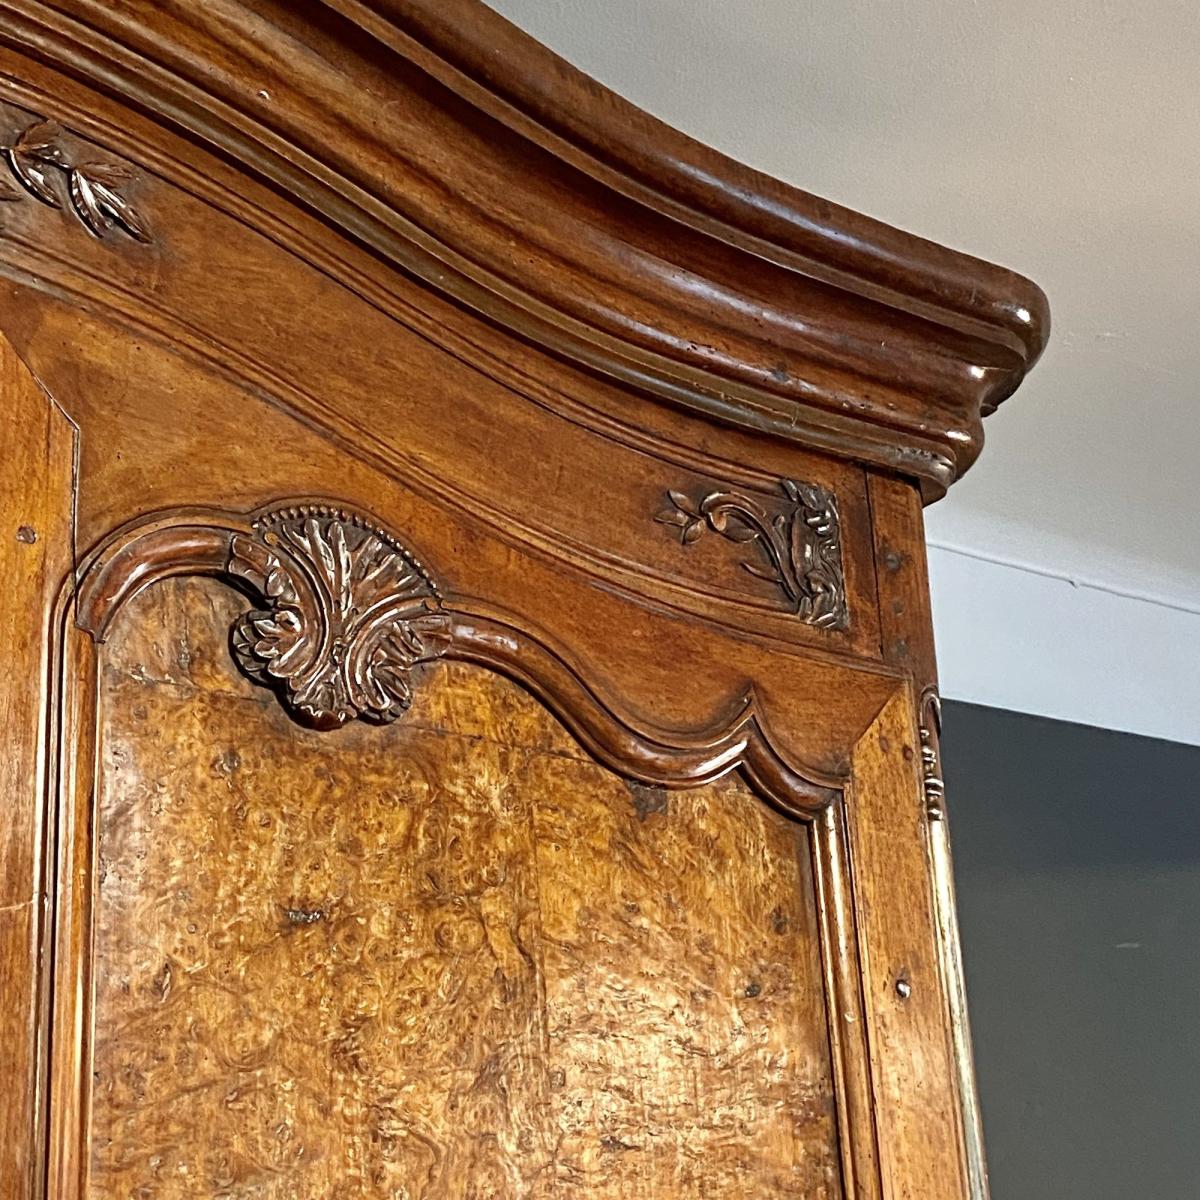 Wonderful Example of a French Walnut and Burr Walnut Armoire